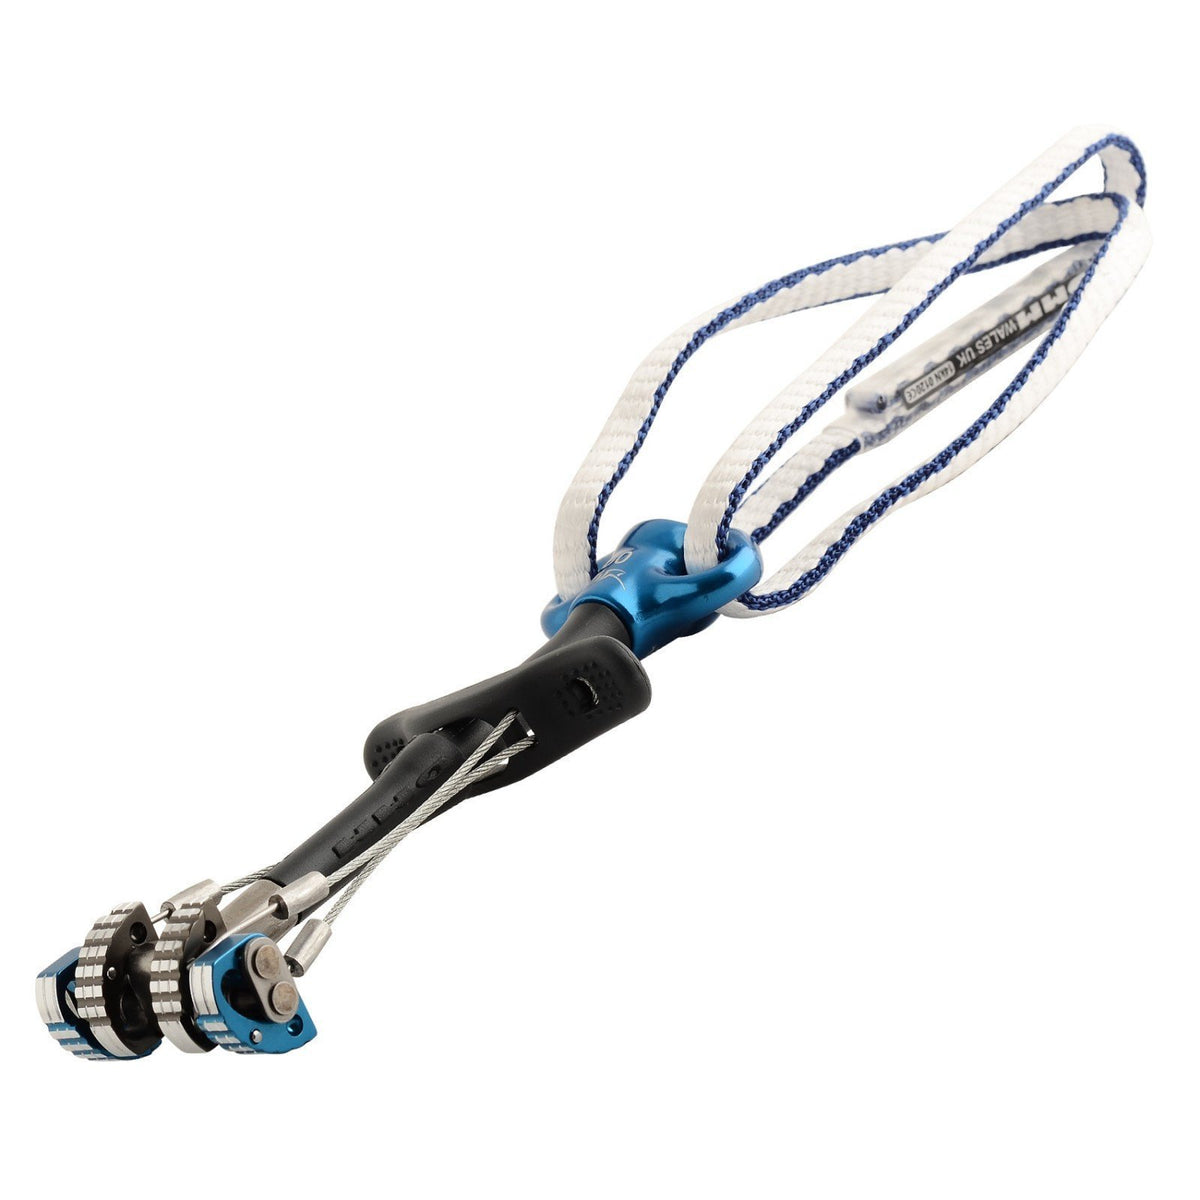 DMM Dragon Cam, Size 00 in blue colour